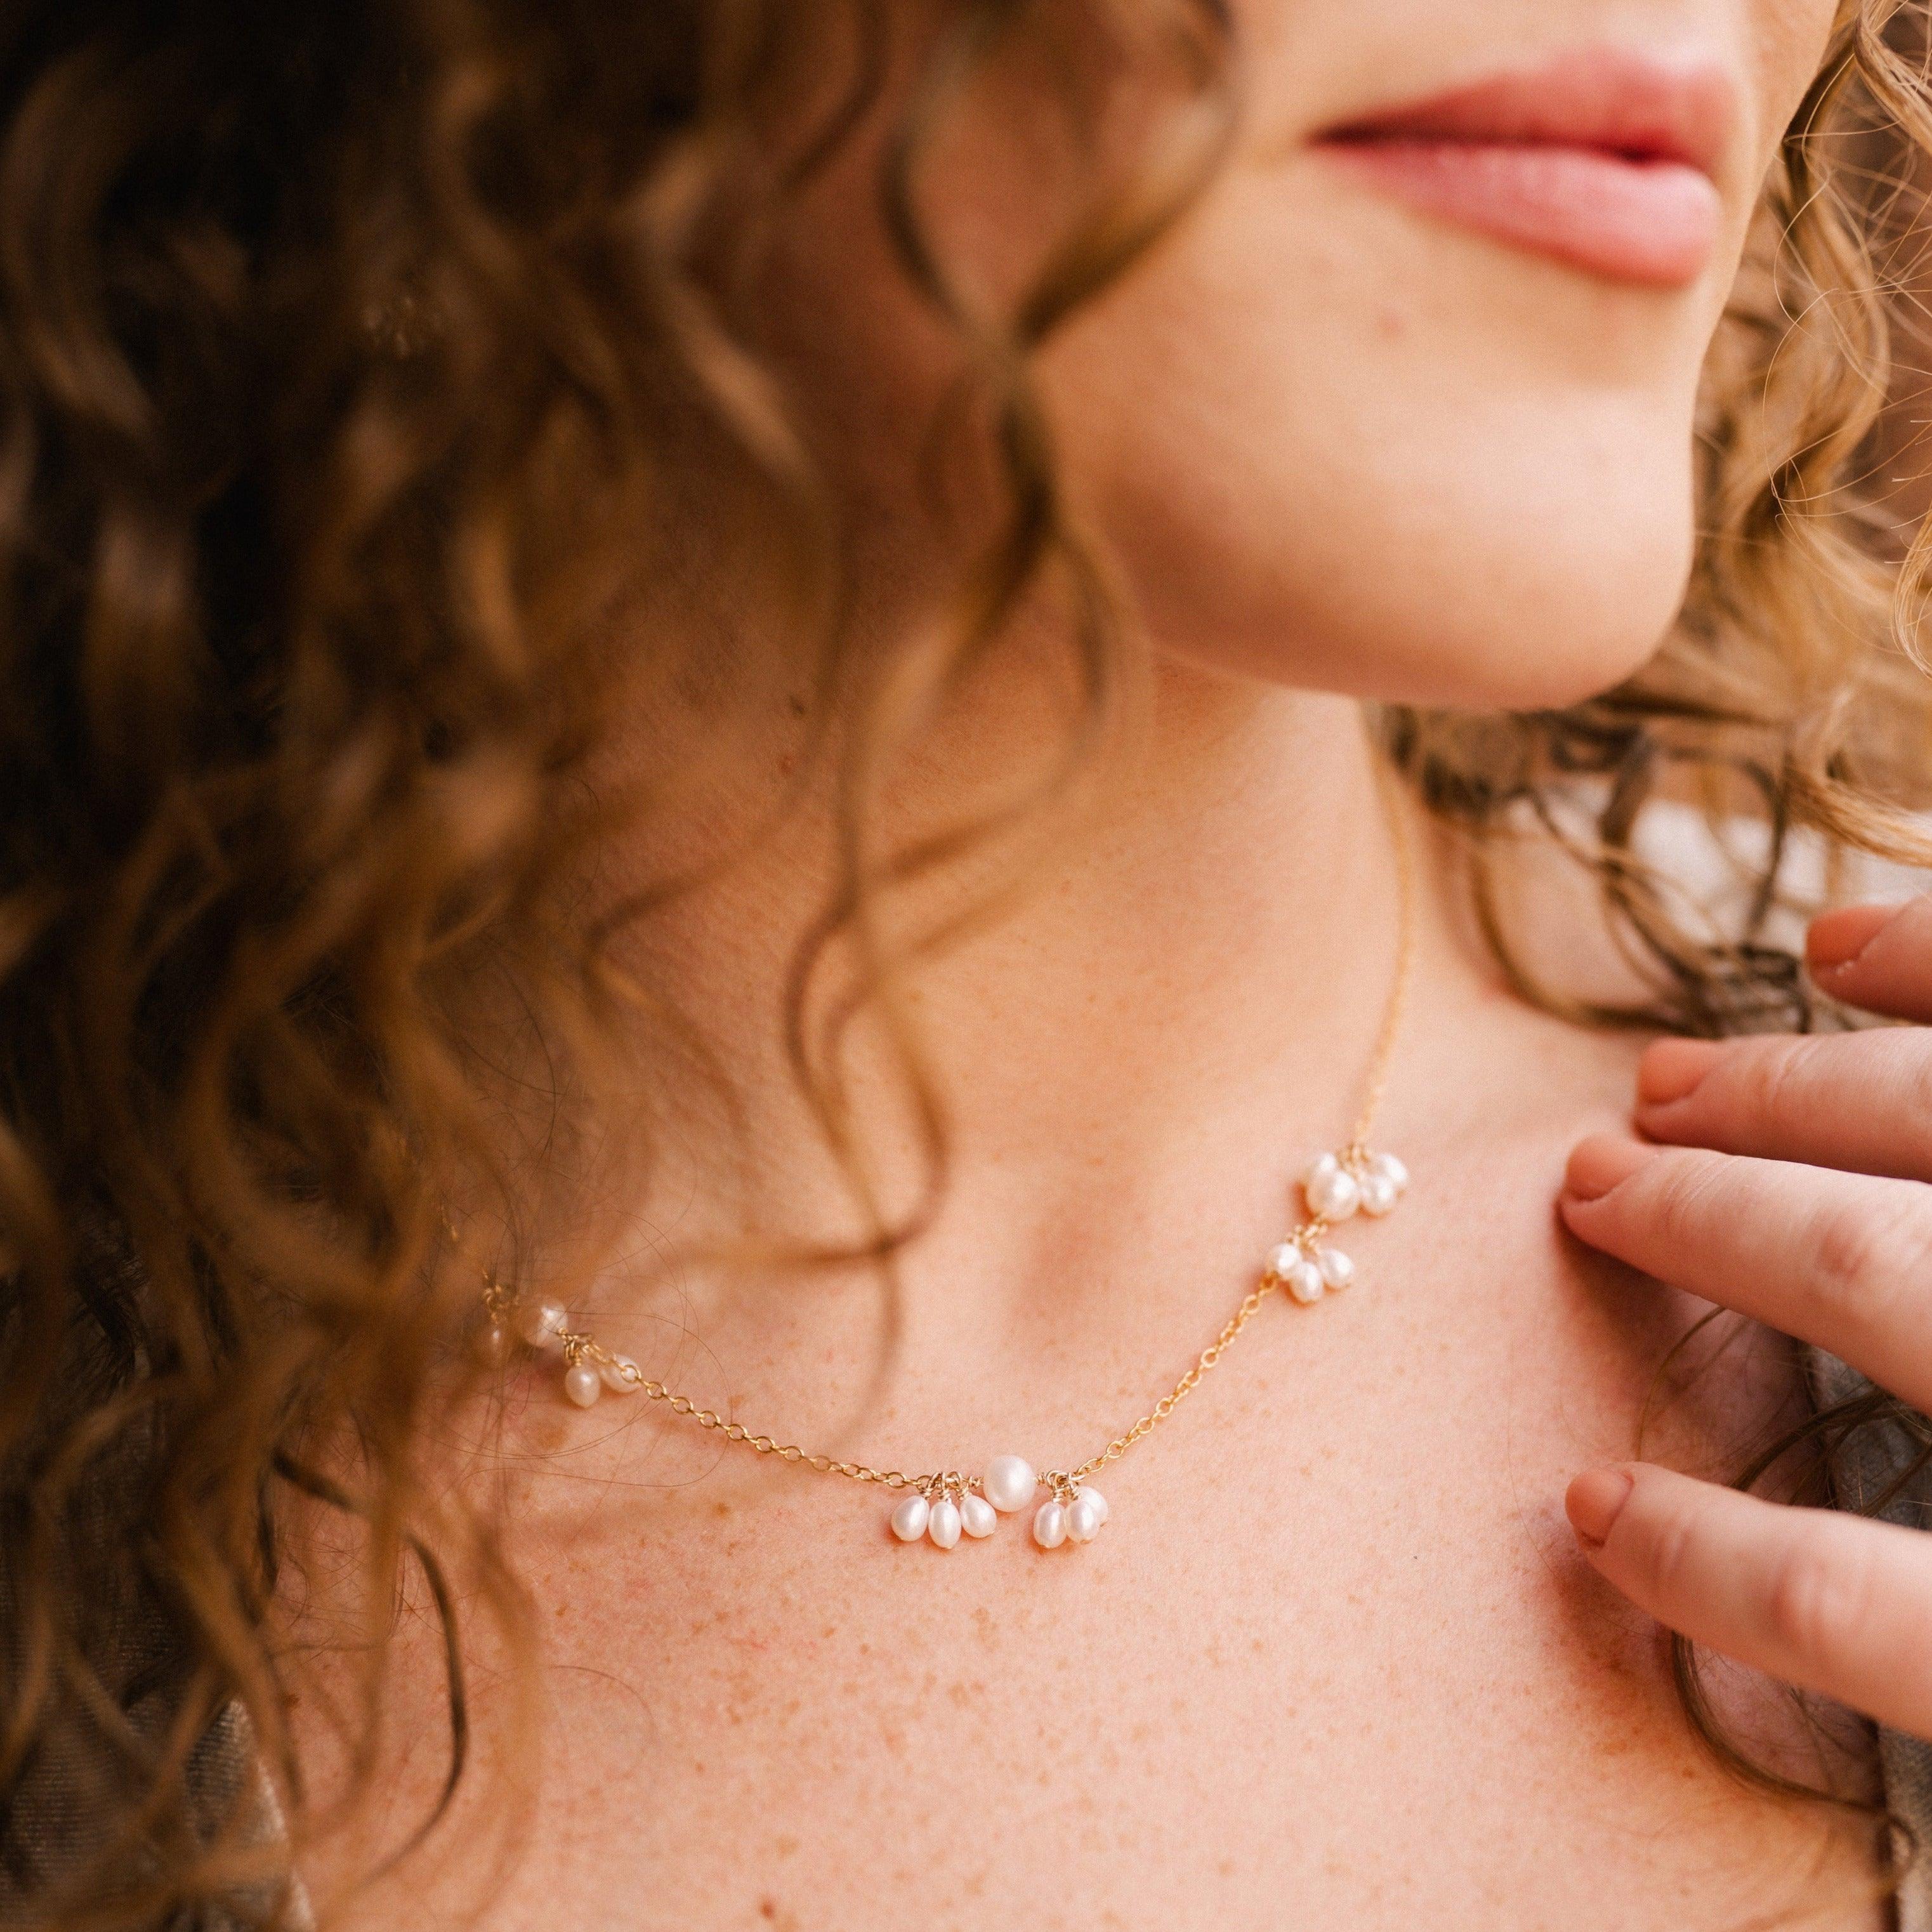 Pearl Blossom Necklace - Nolia Jewelry - Meaningful + Sustainably Handcrafted Jewelry